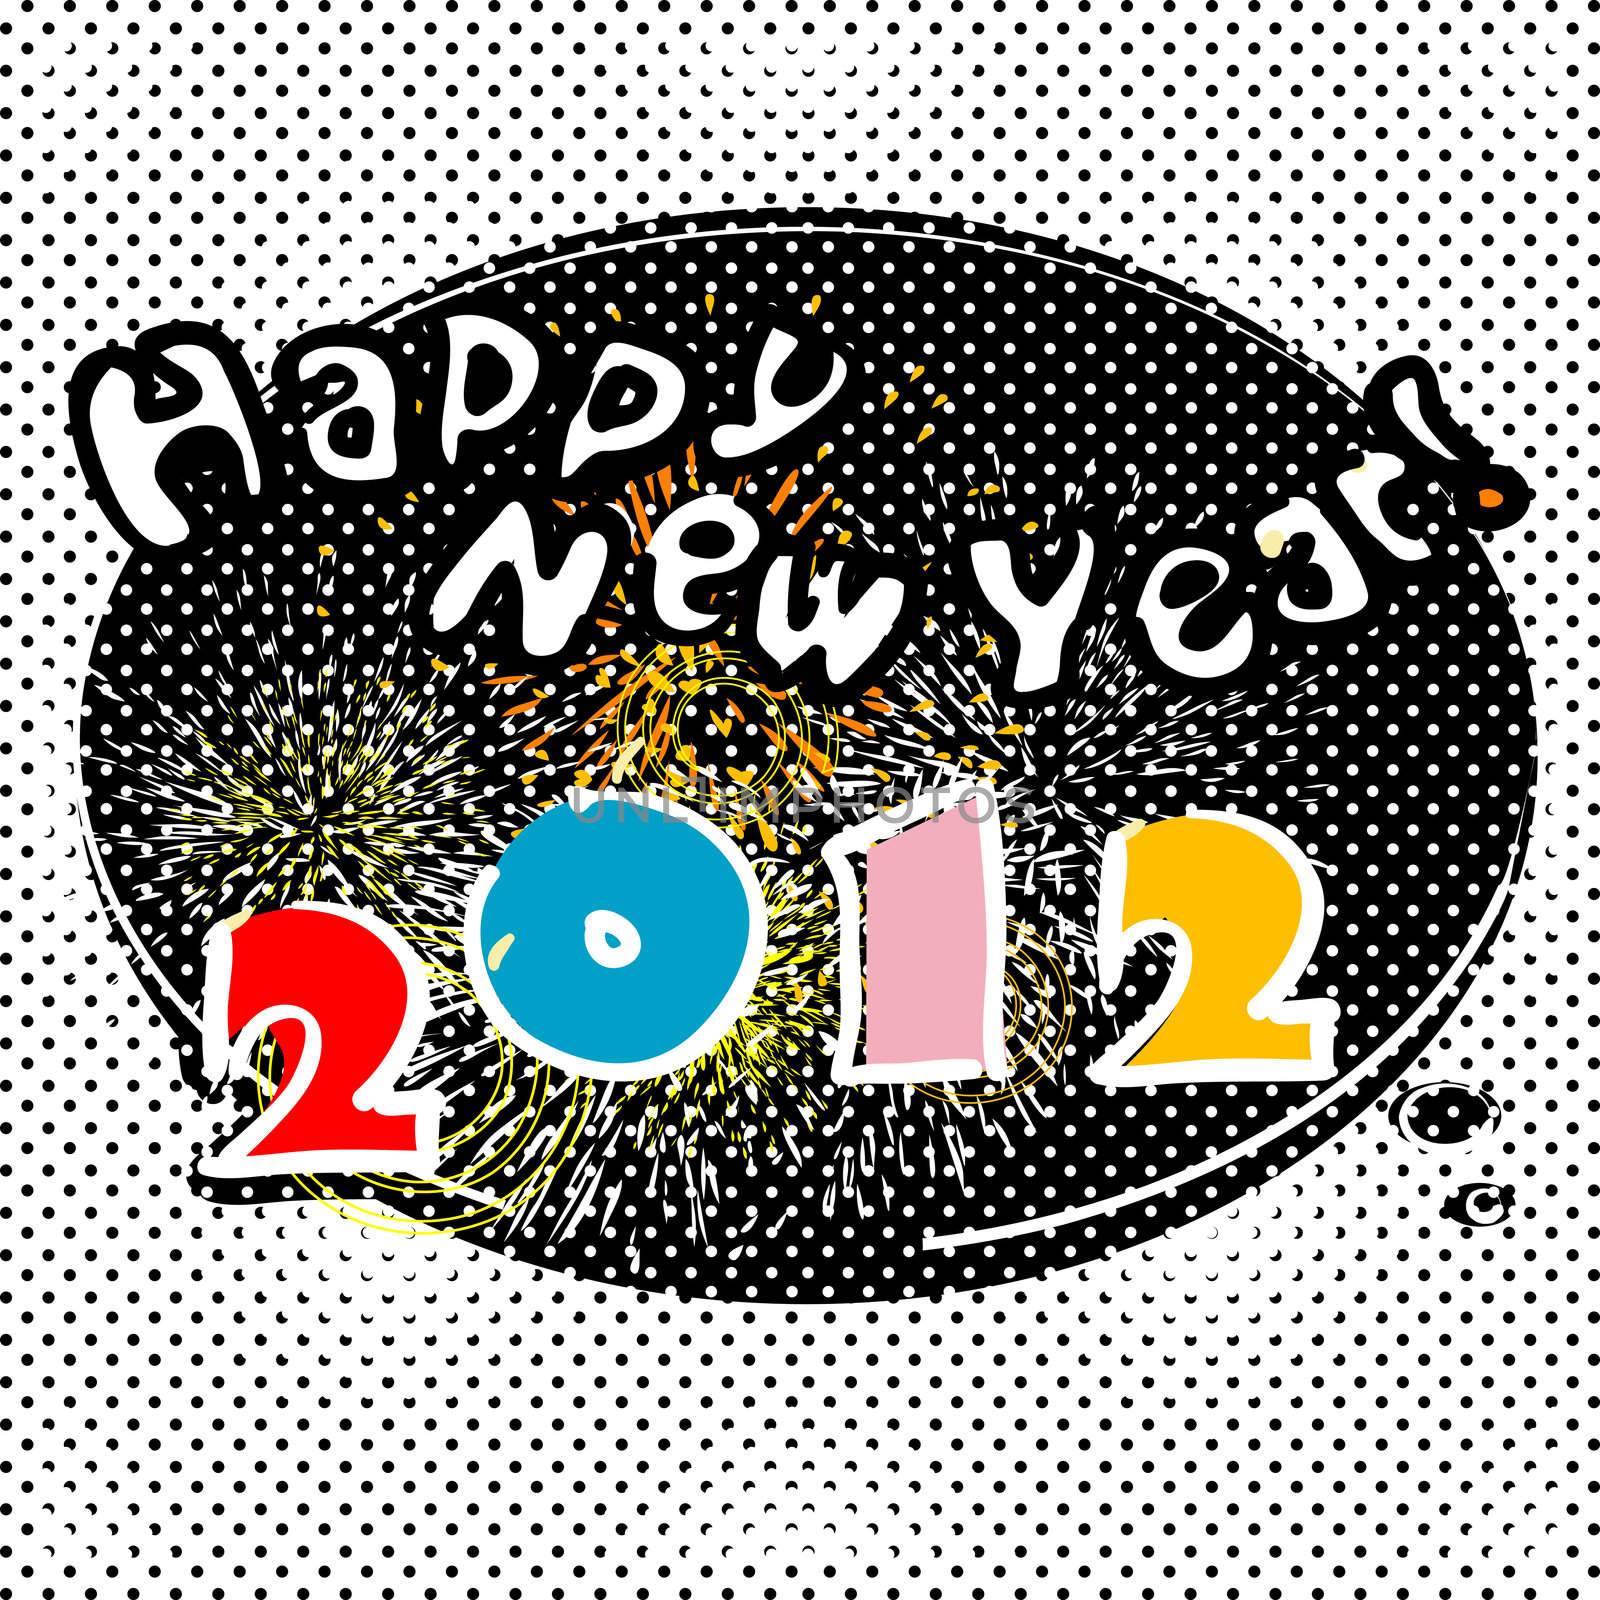 happy new year 2012 by catacos